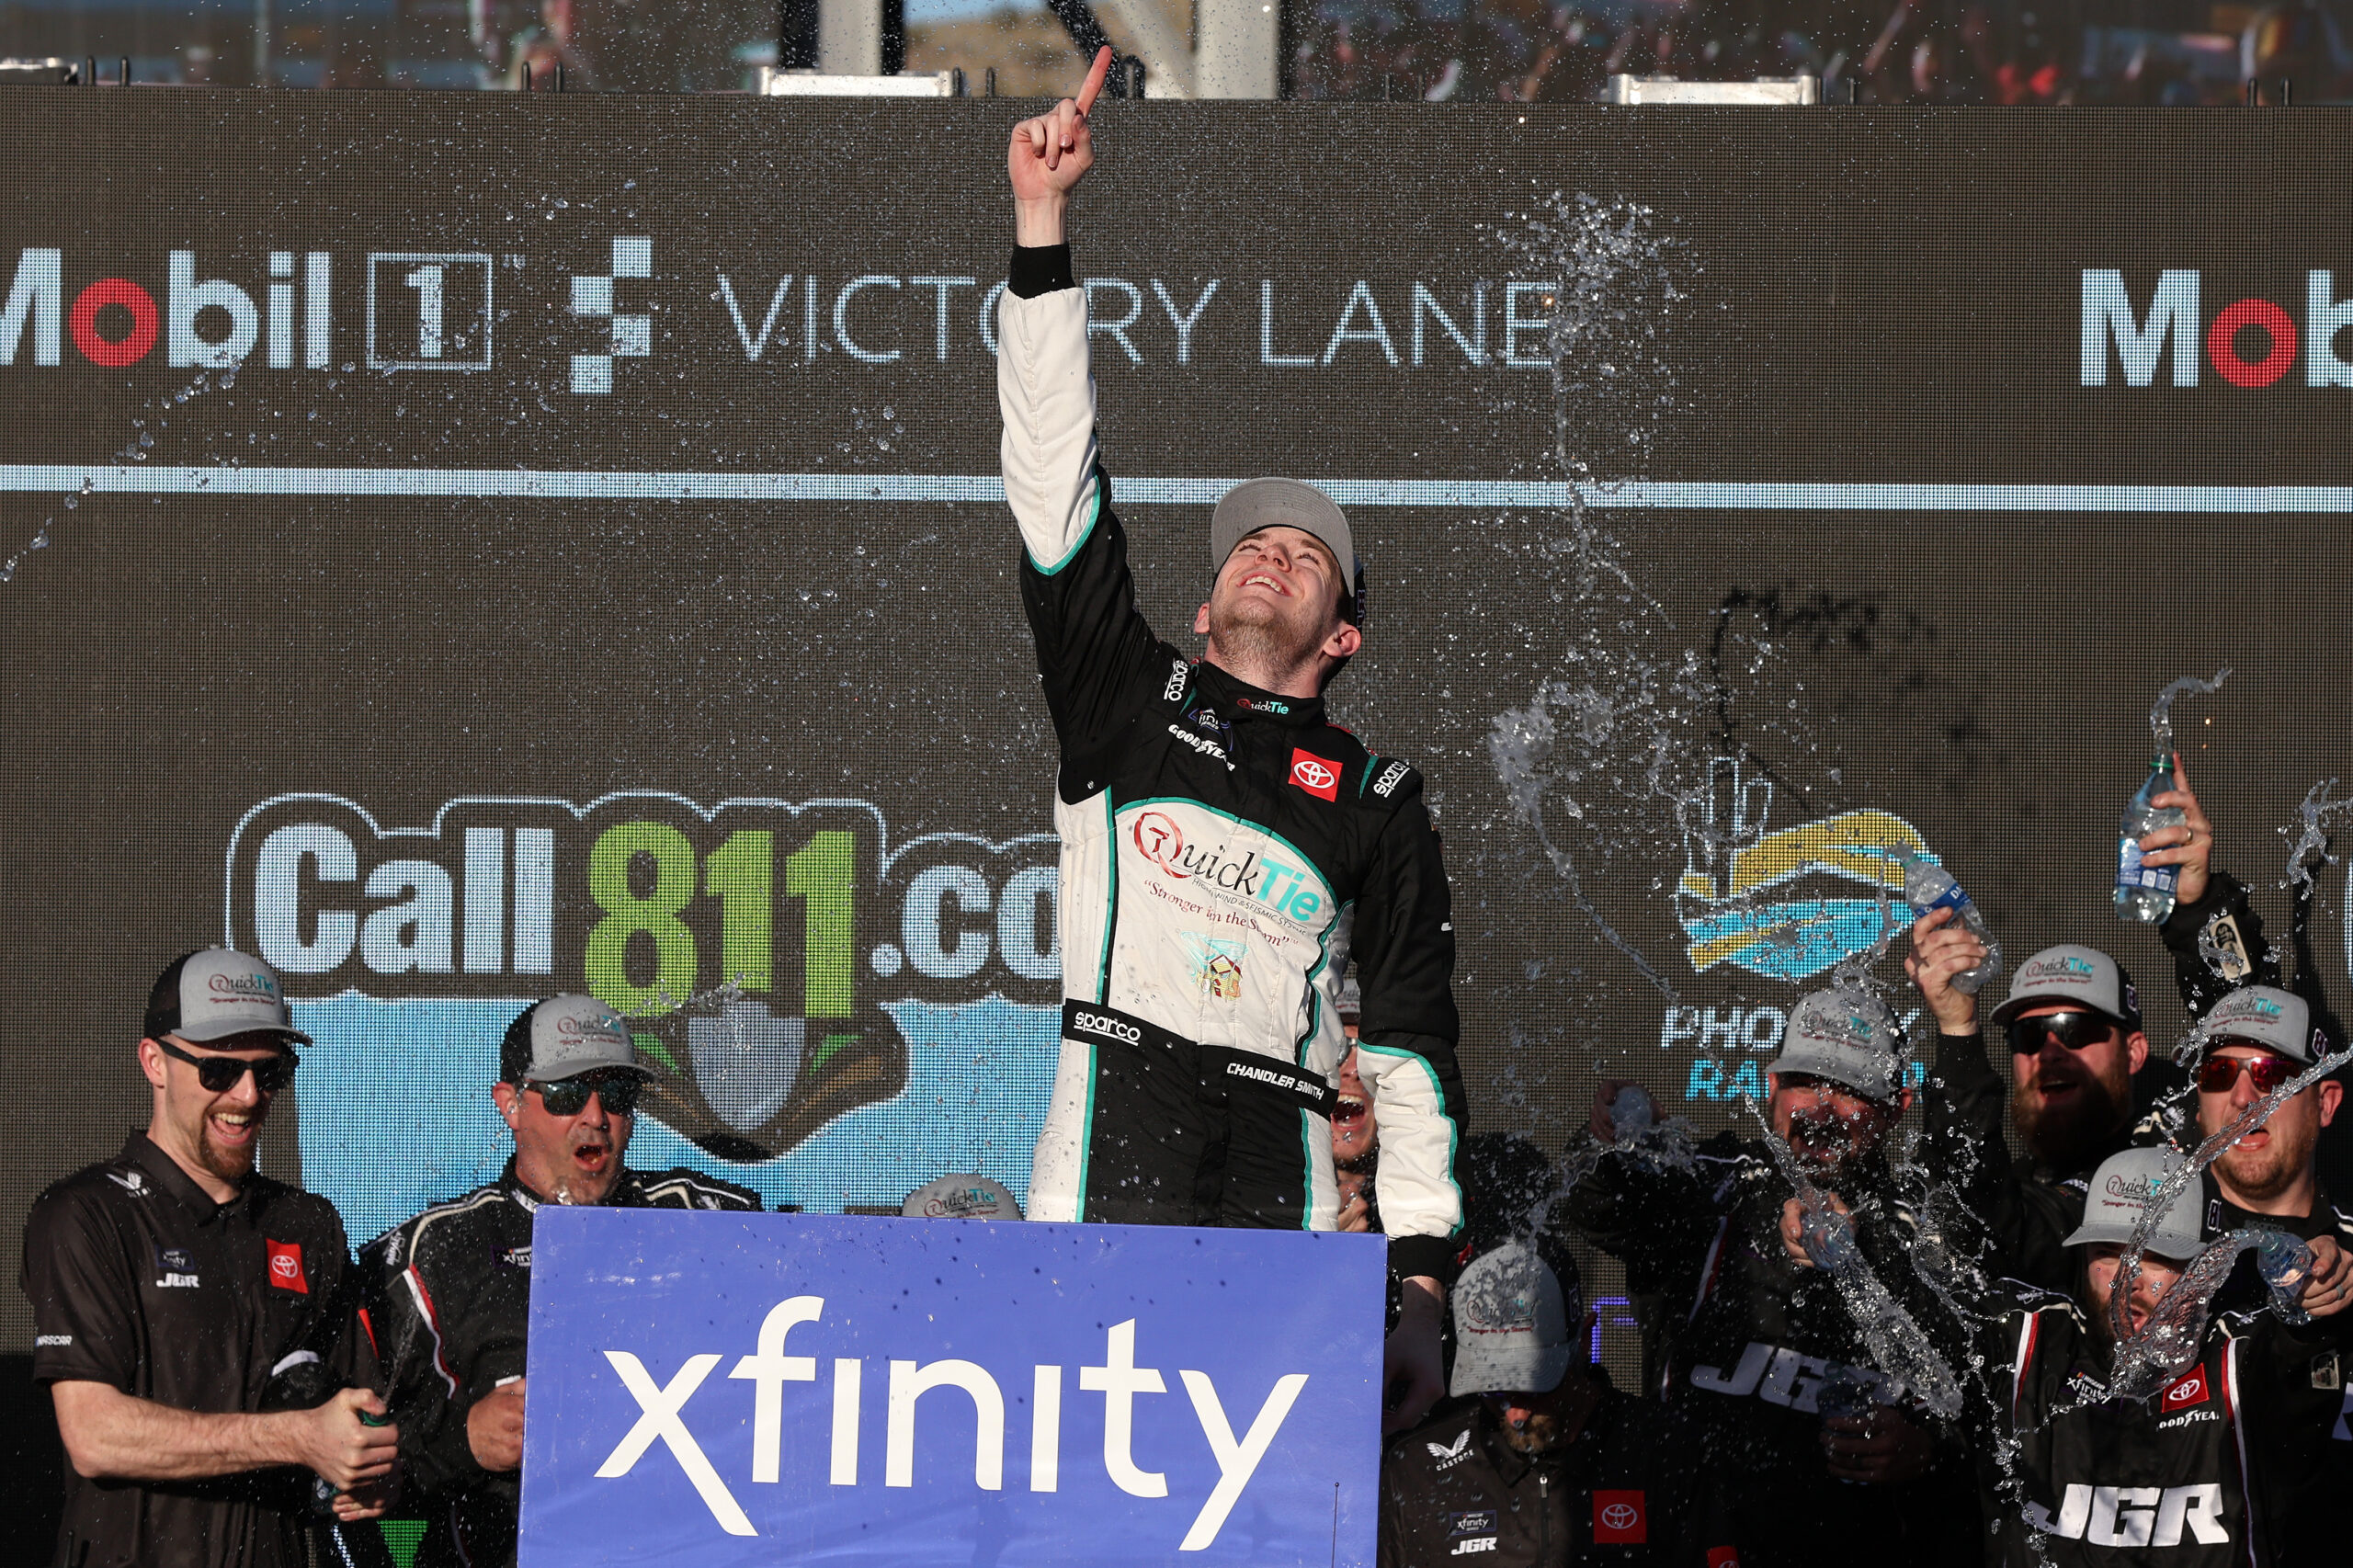 Chandler Smith wins NASCAR Xfinity Series race in overtime at Phoenix